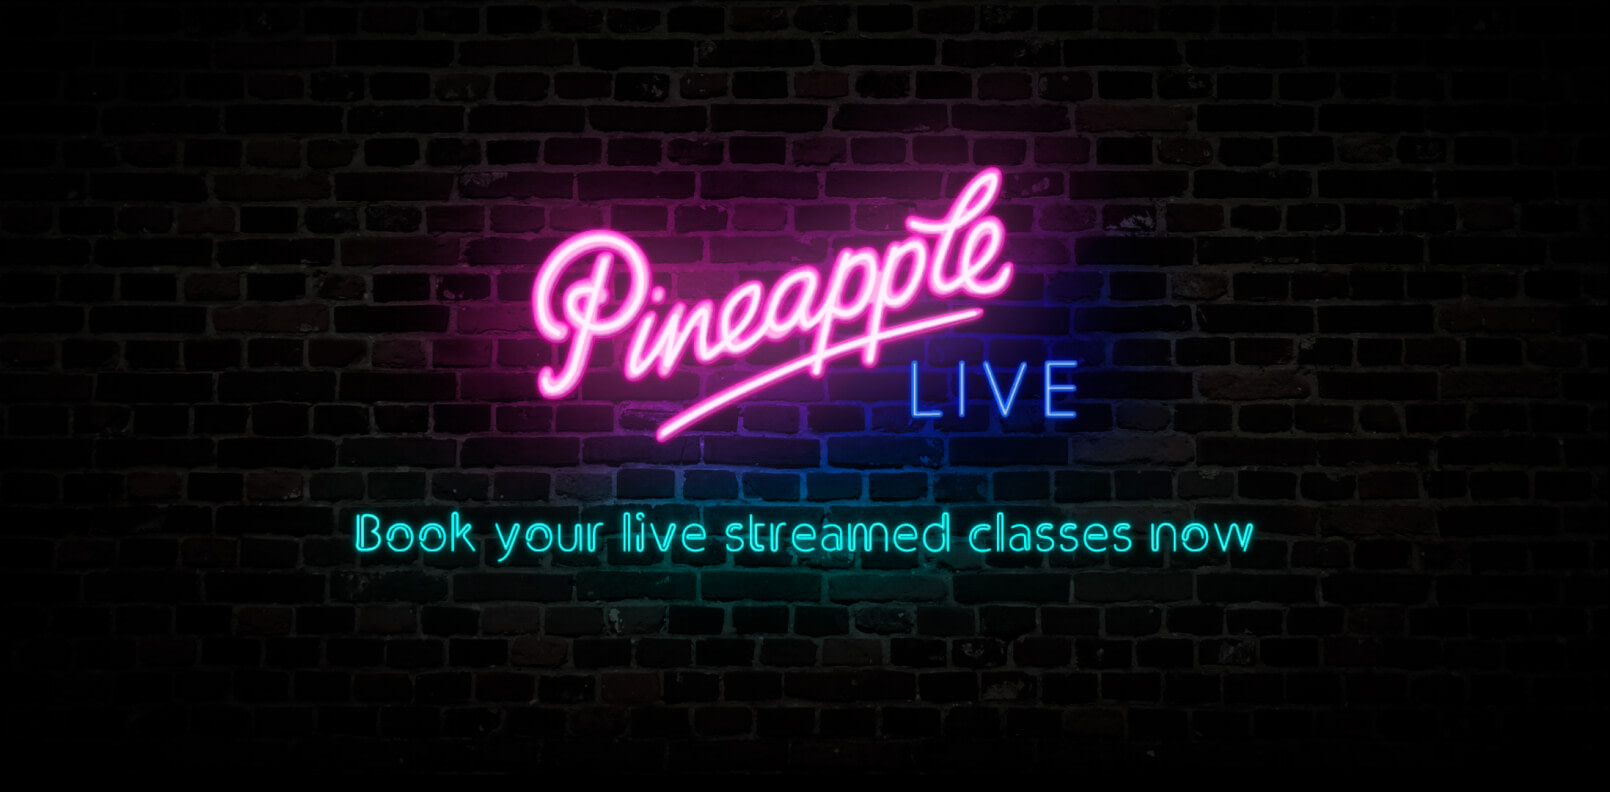 A neon lit sign that says "Pineapple LIVE, Book your live streamed classes now" on a brick background.